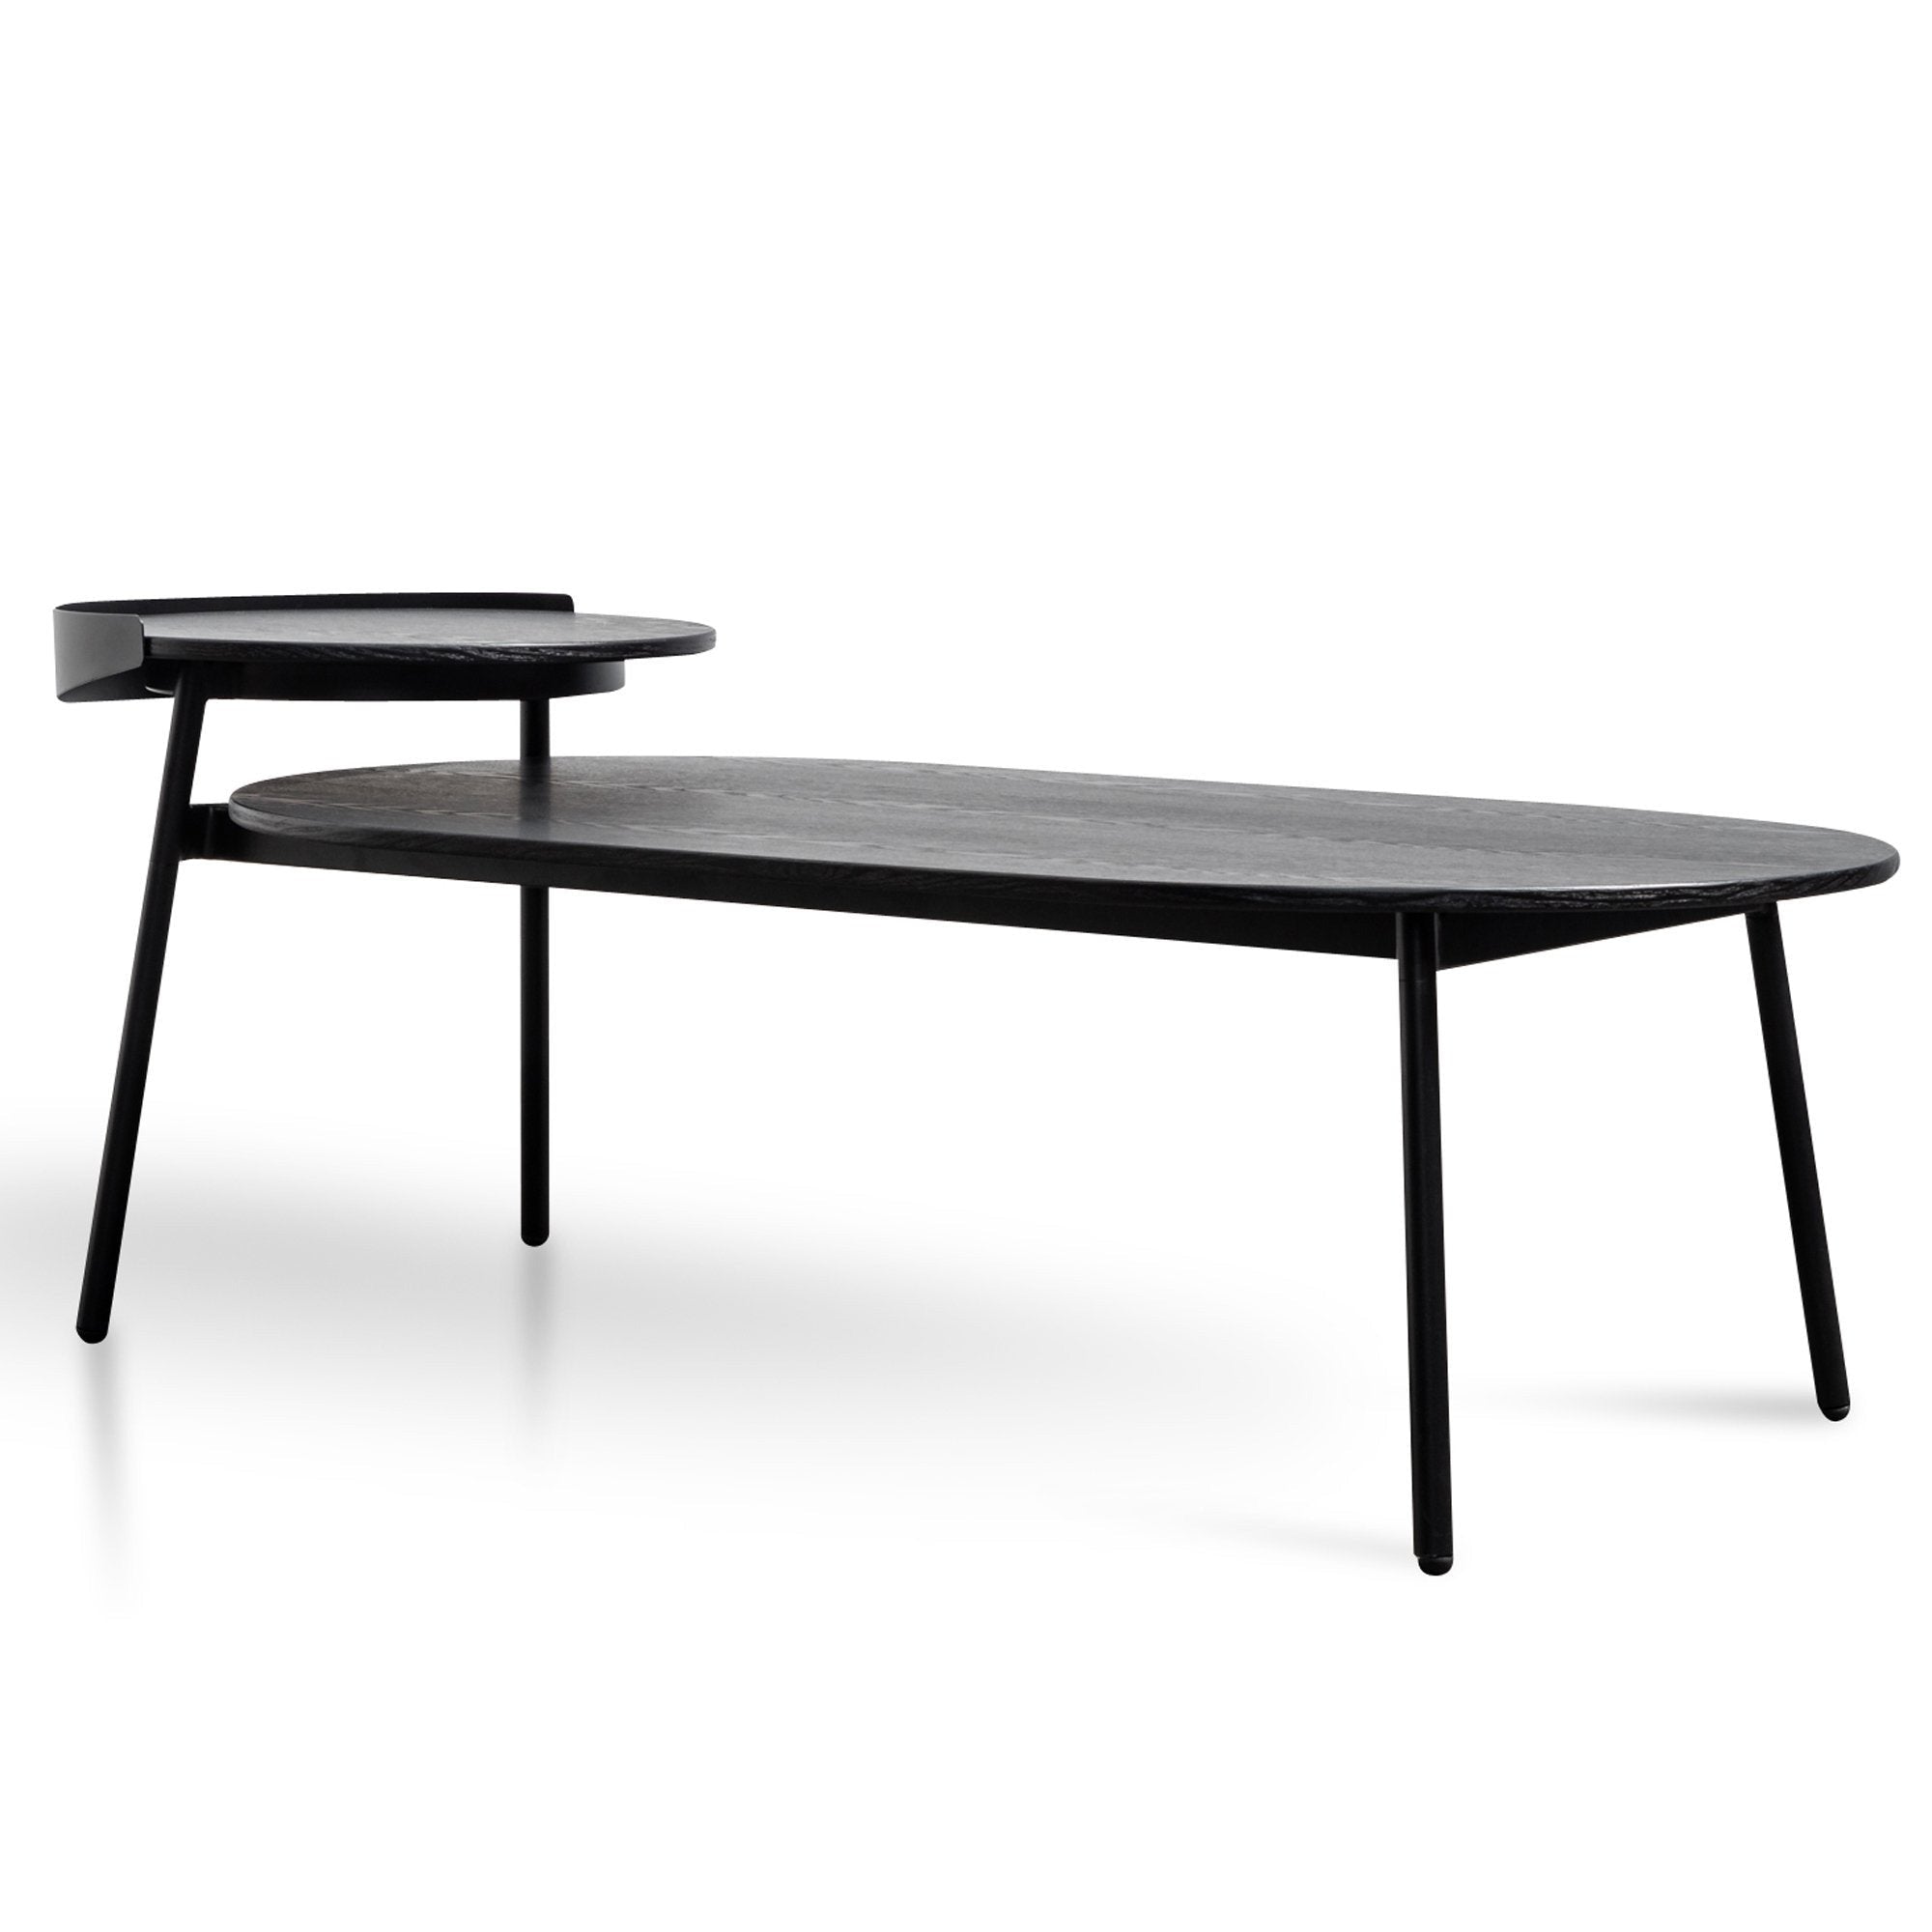 1.47m Wooden Coffee Table - Full Black